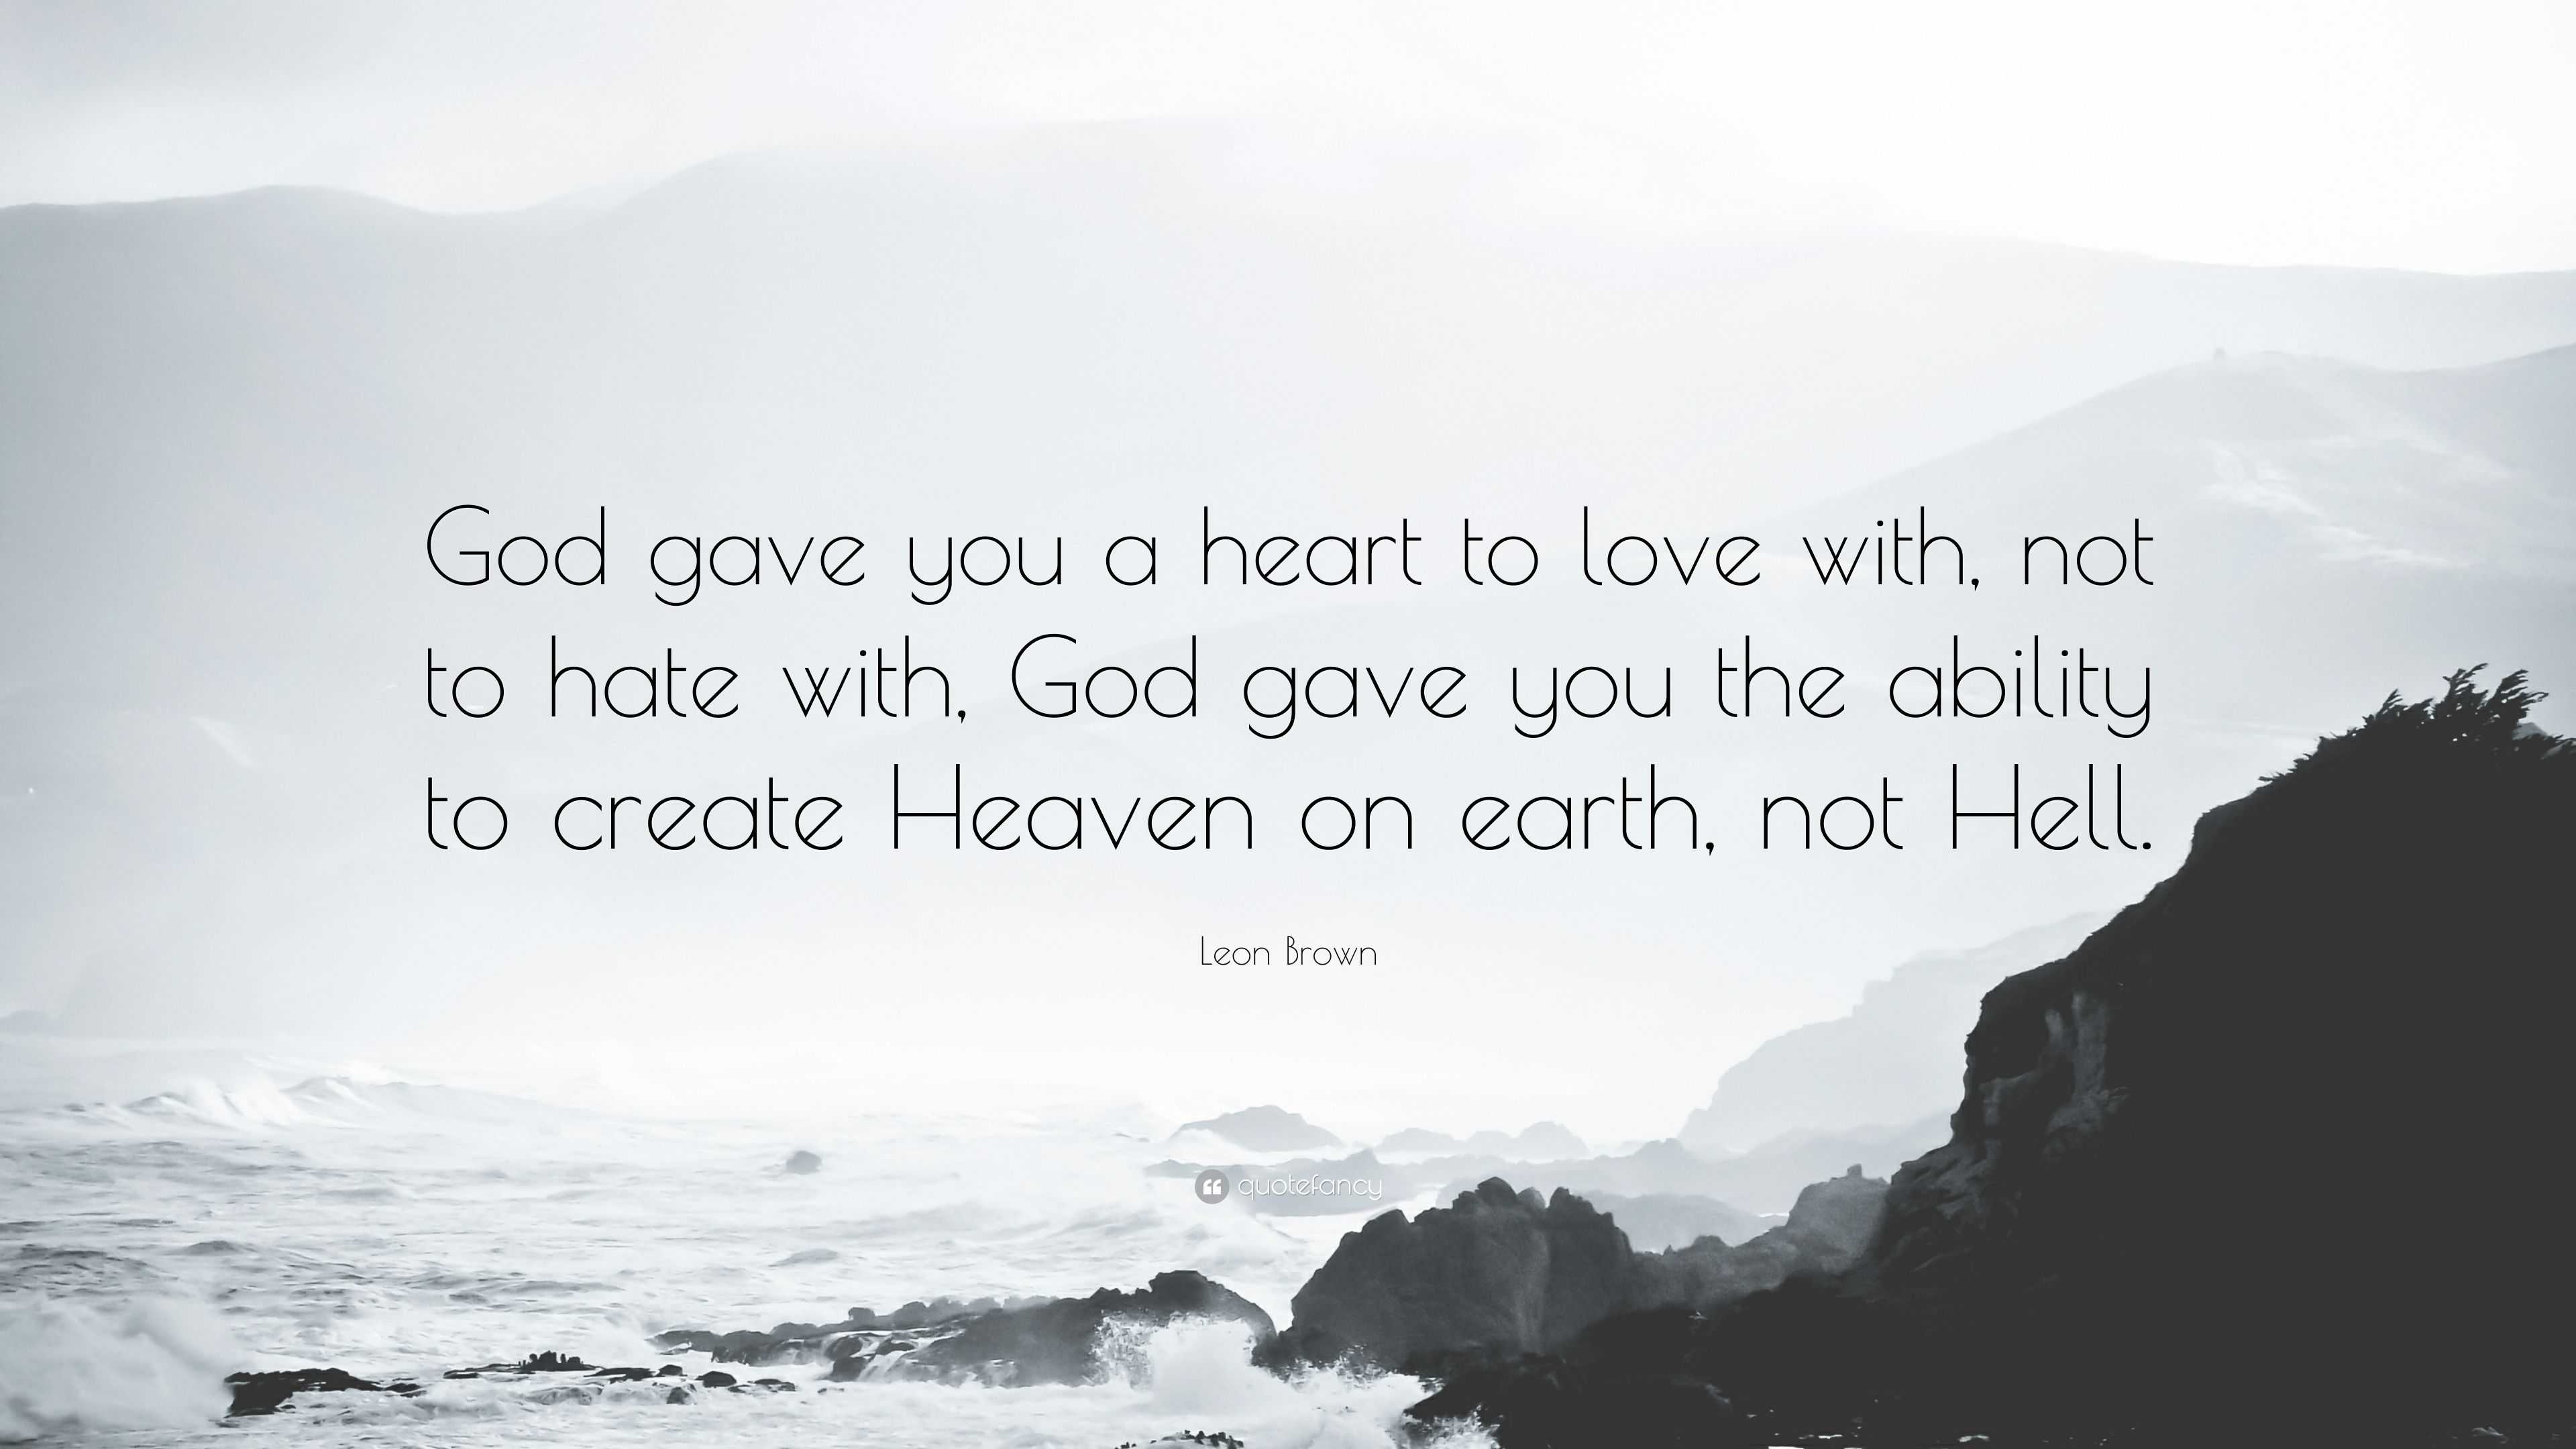 Leon Brown Quote “God gave you a heart to love with not to